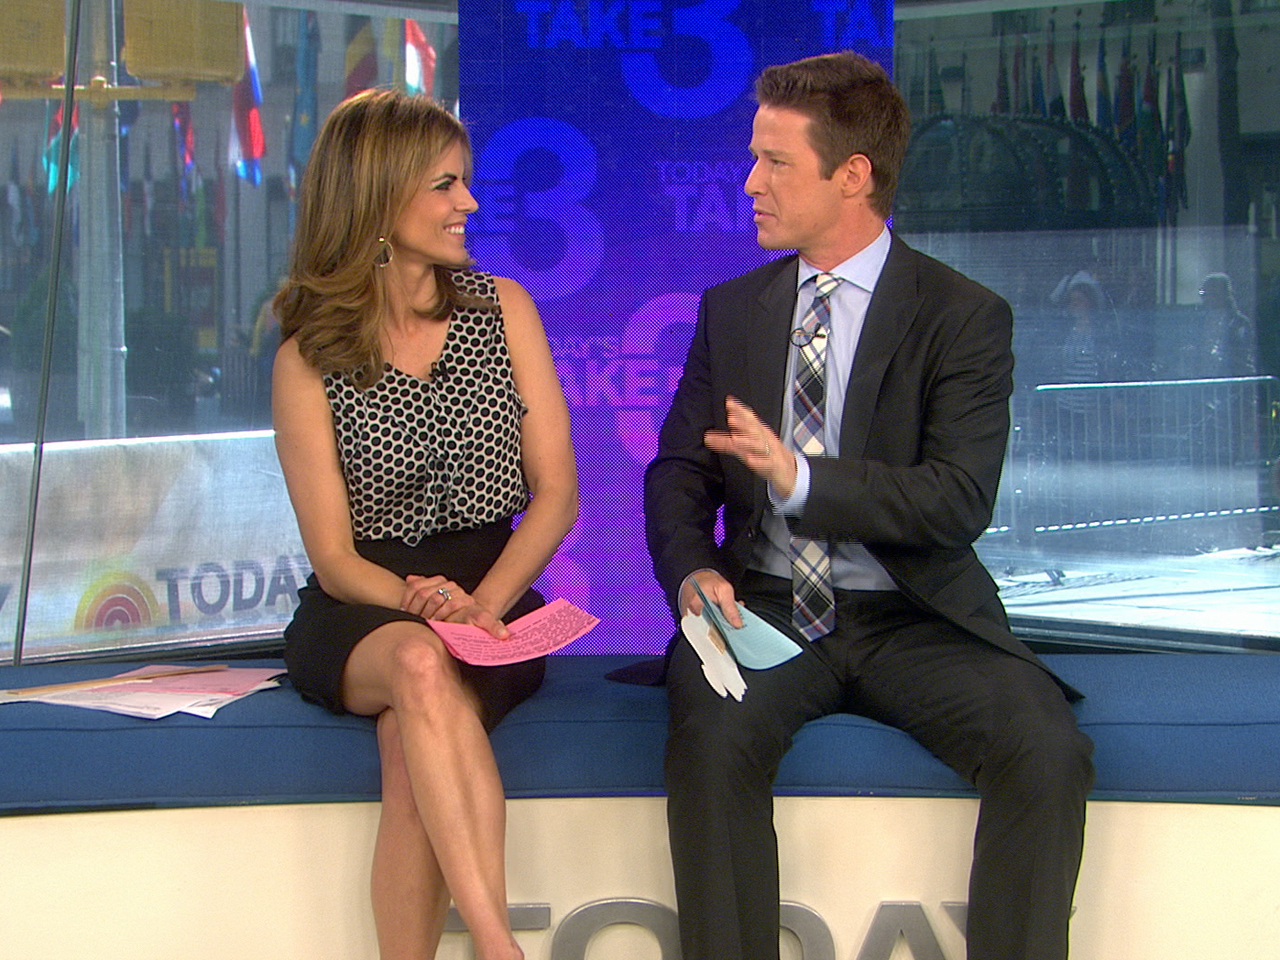 Natalie Morales Calls Out Photographer Who Took Upskirt Photos.